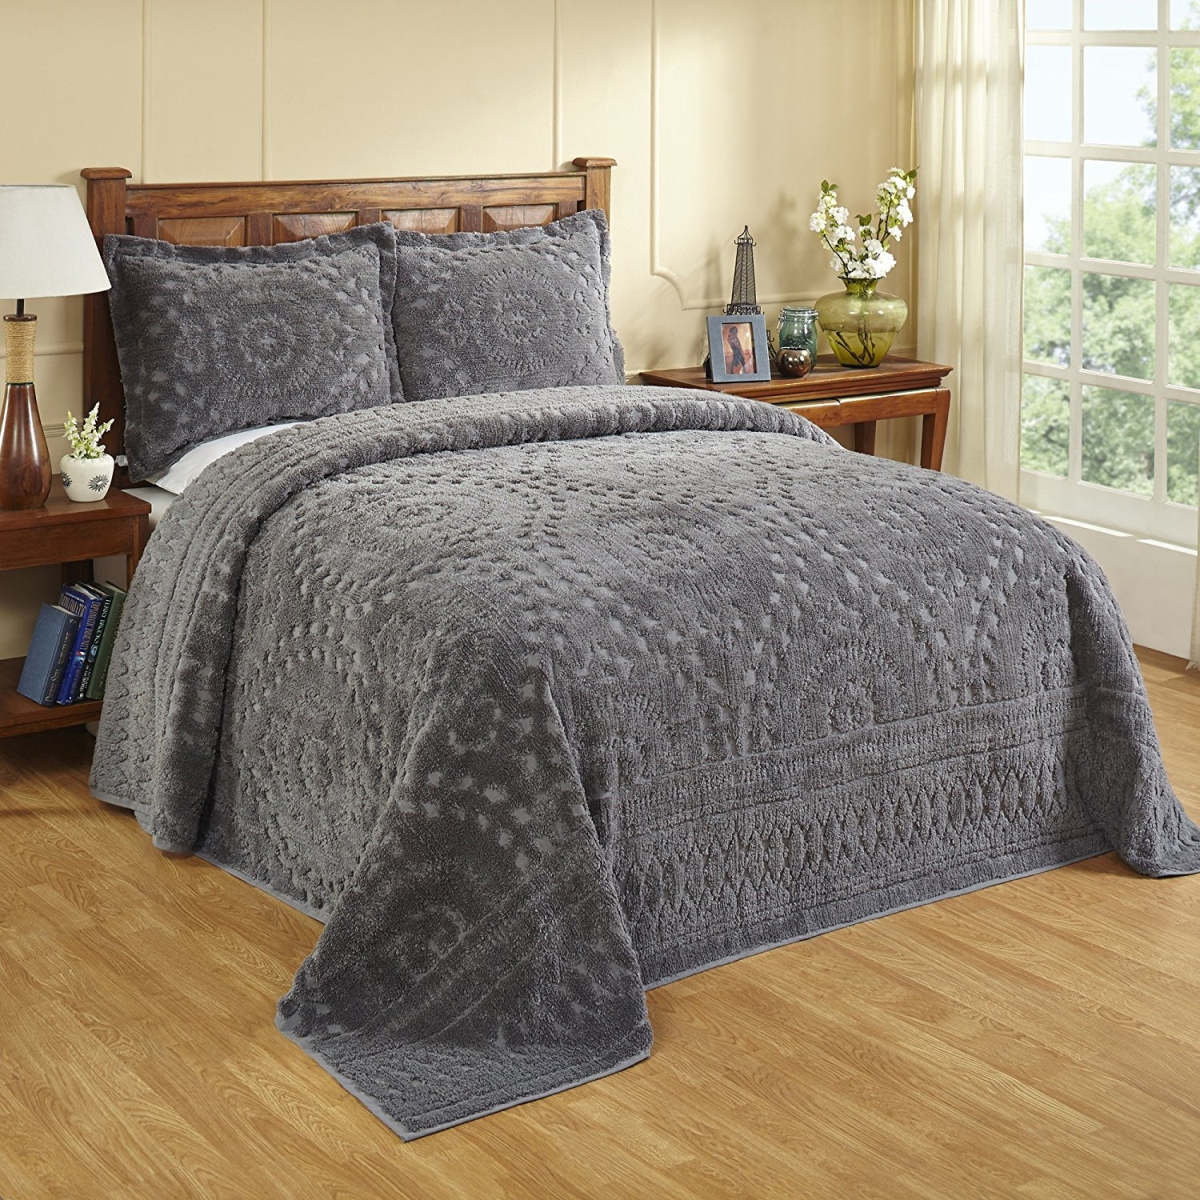 Bsrdogry 96 X 110 In. Rio Chenille Bedspread, Grey - Double